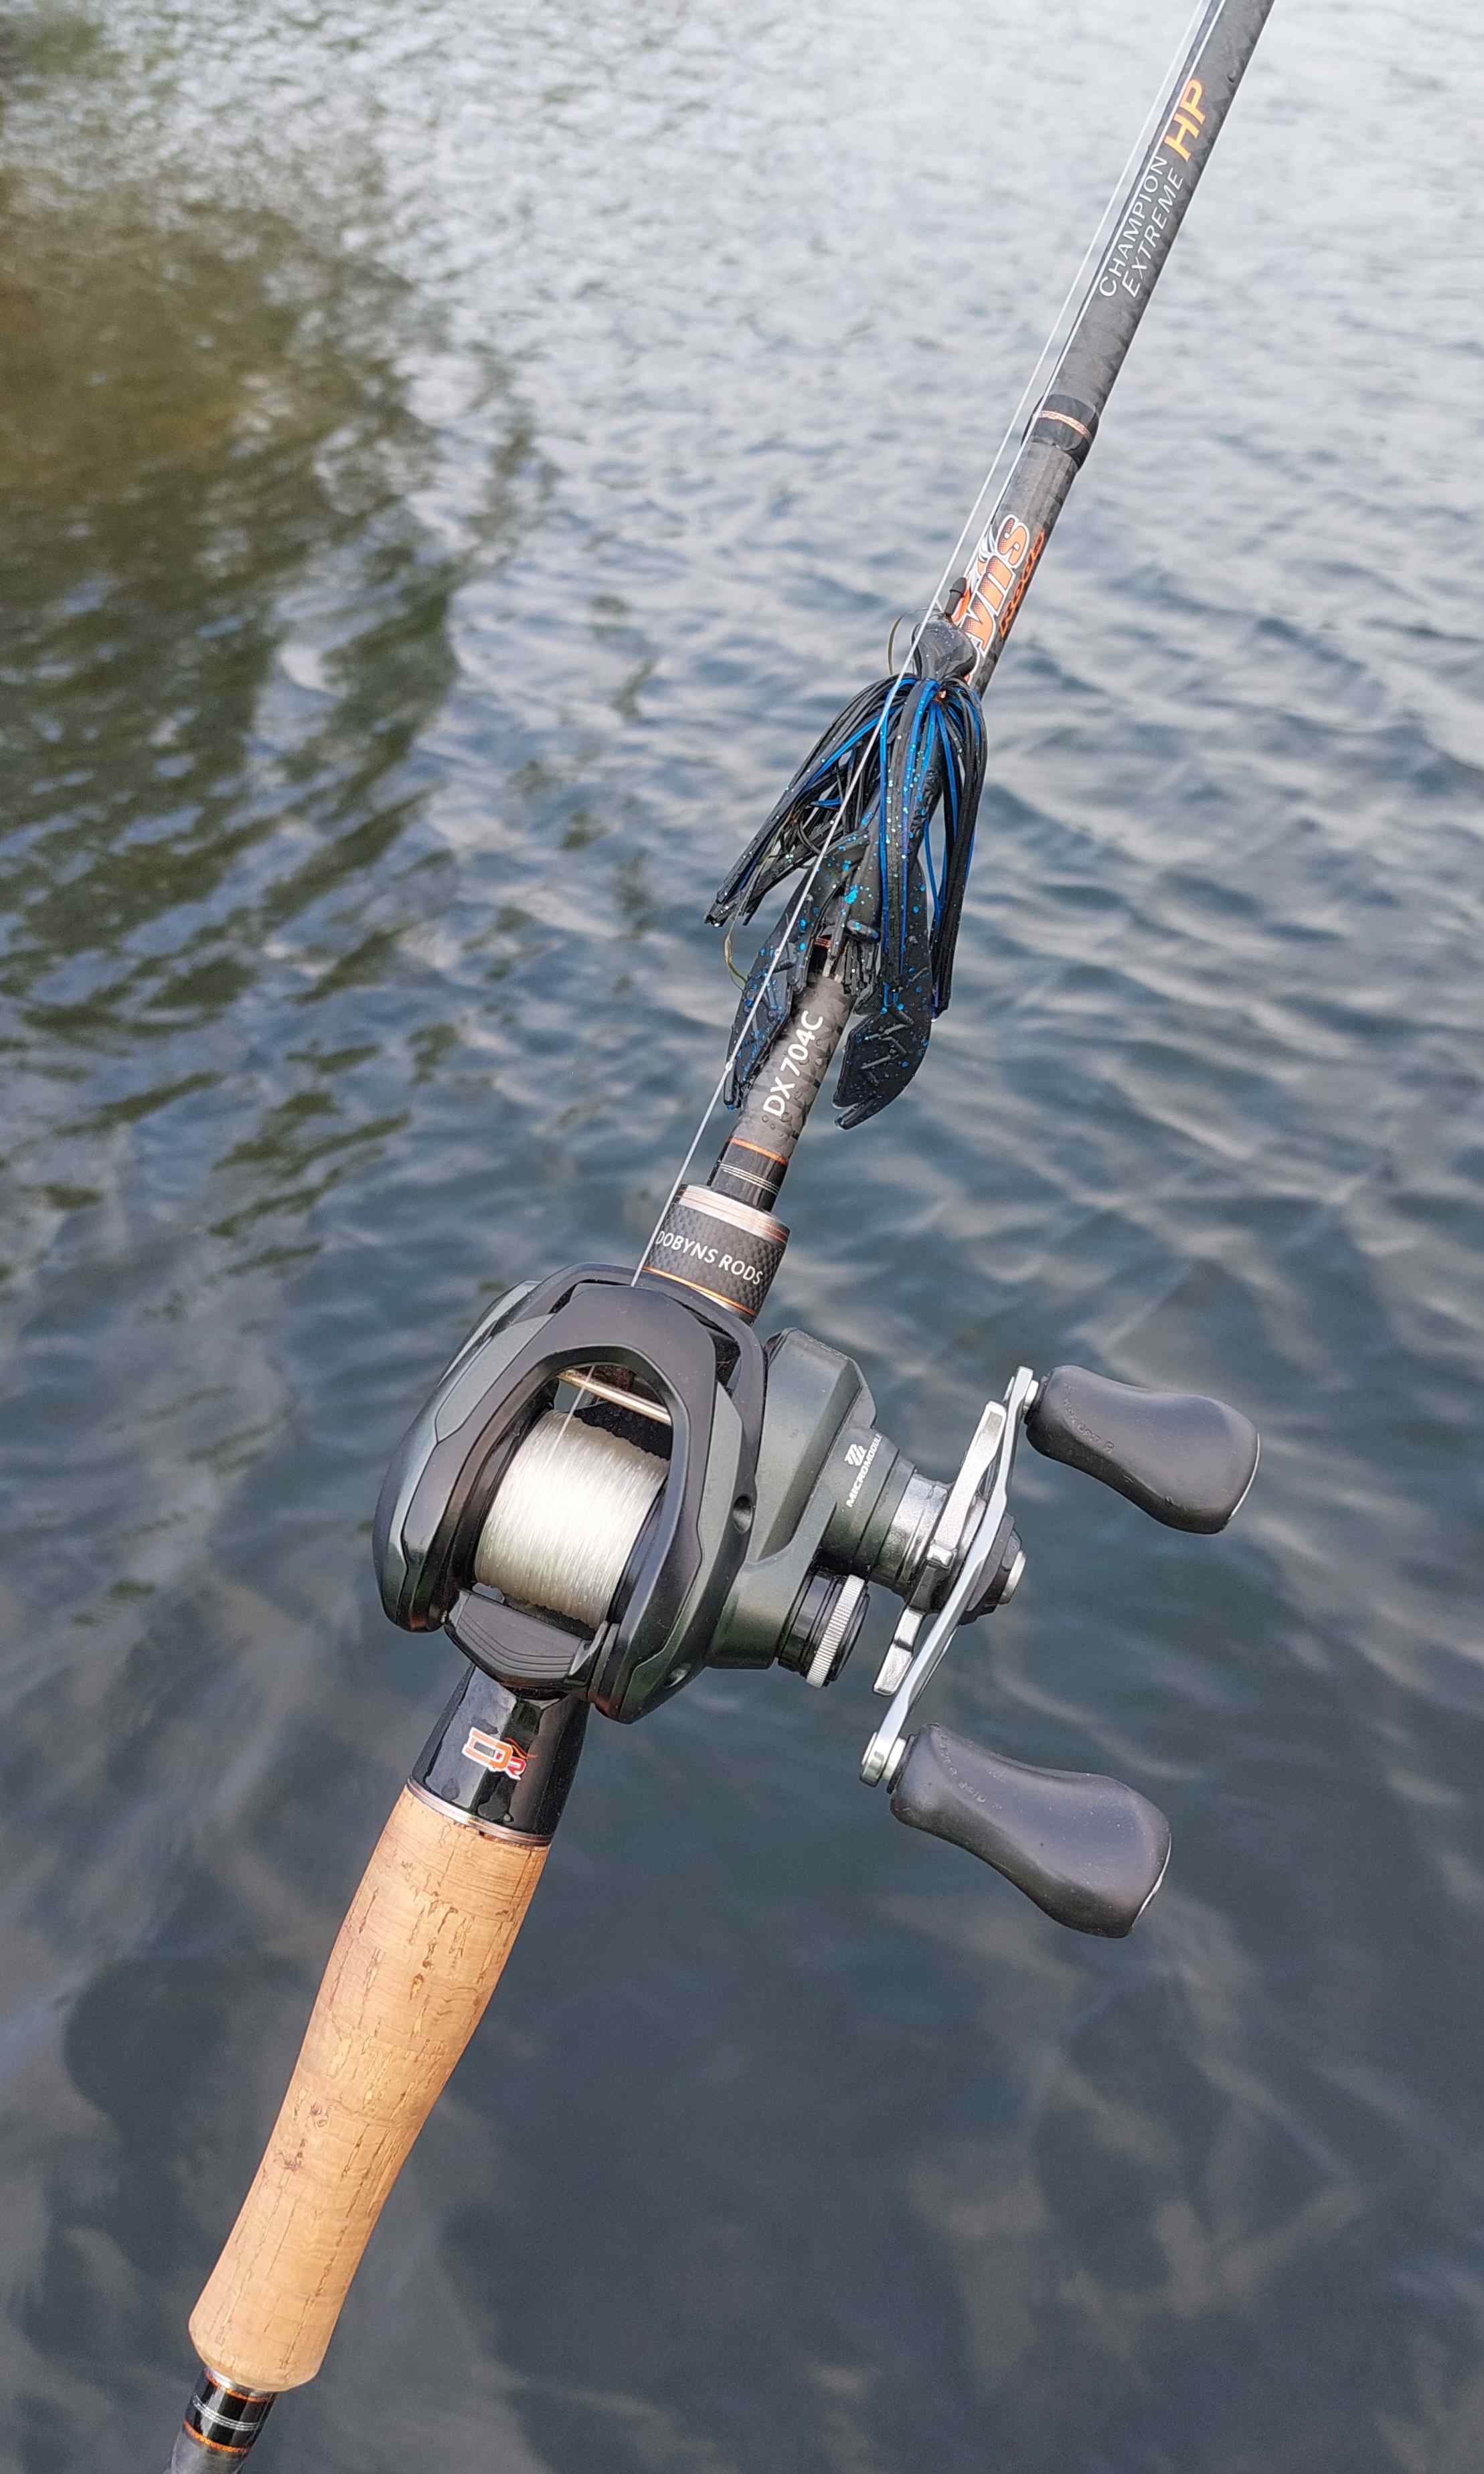 Is This The Perfect Beginner Swimbait Rod? Daiwa DX Rod Review